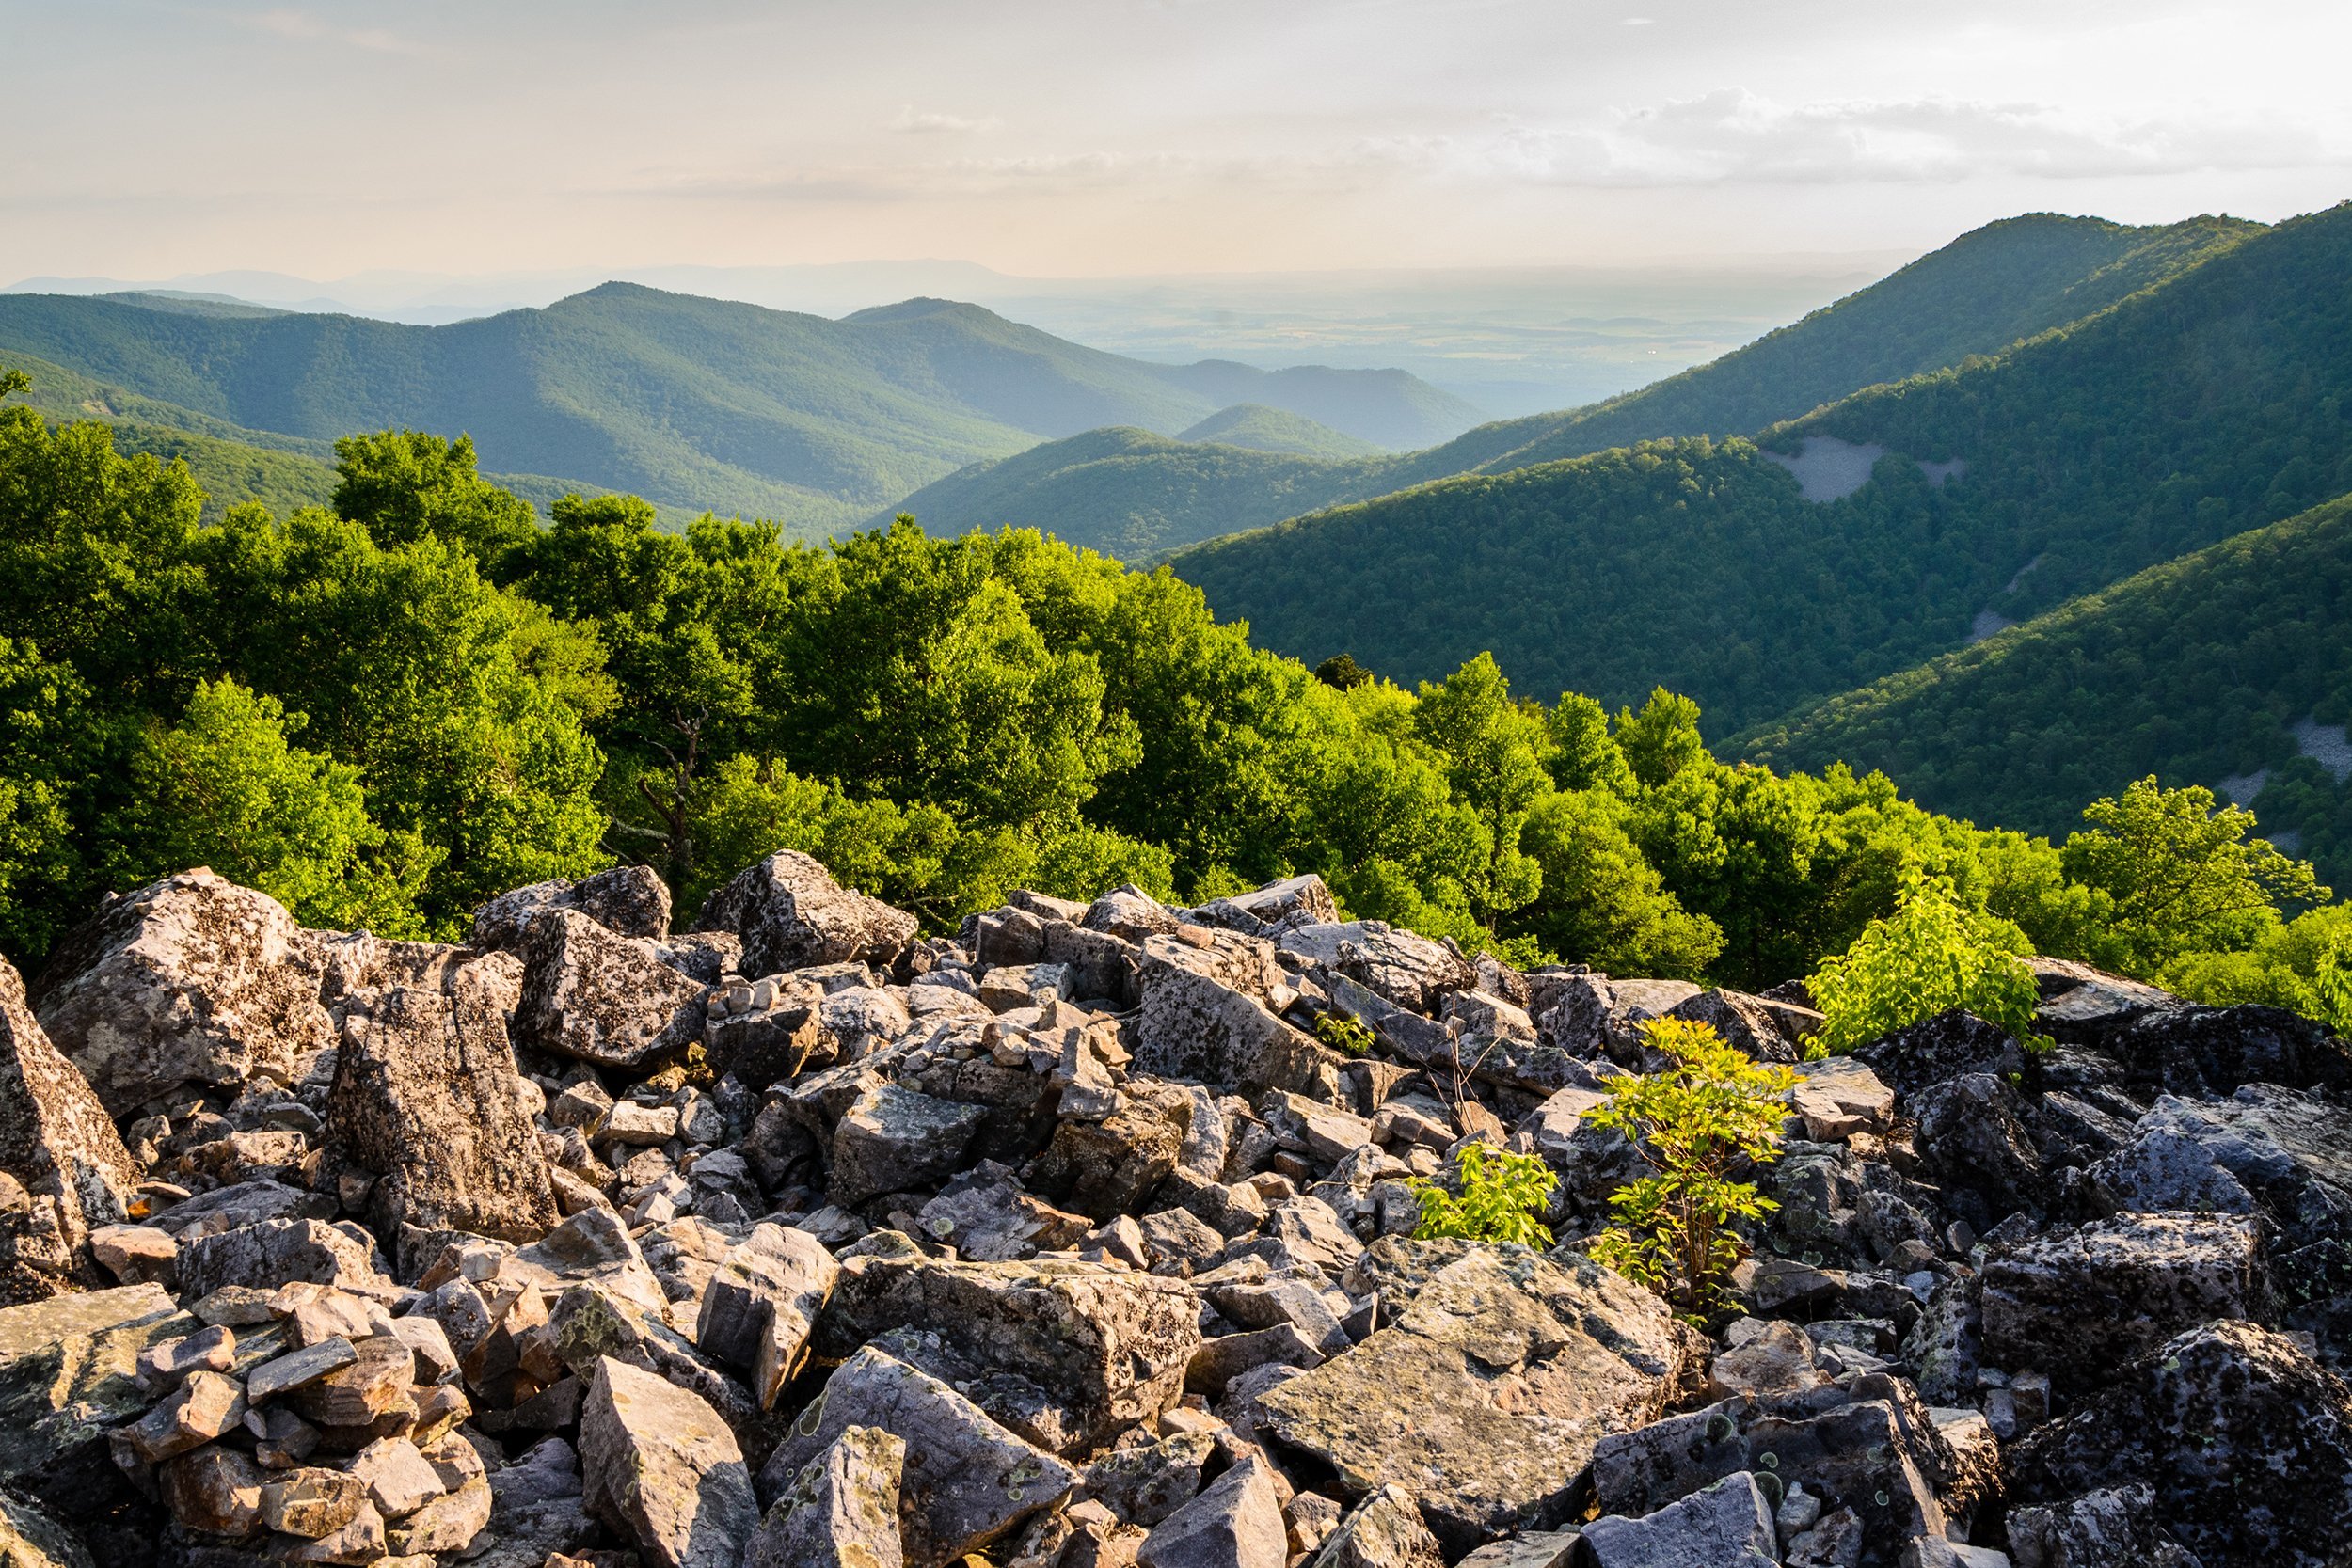 <p>Part of the Blue Ridge Mountains, <a href="https://www.nps.gov/shen/index.htm">Shenandoah National Park</a> has nearly 200,000 acres open for backcountry camping, but there's no need to rough it. The park has several lodges and cabins available to rent and four established campgrounds. One of the park's main attractions (and the only public road through the park) is Skyline Drive, a 105-mile stretch with 75 scenic overlooks.</p>